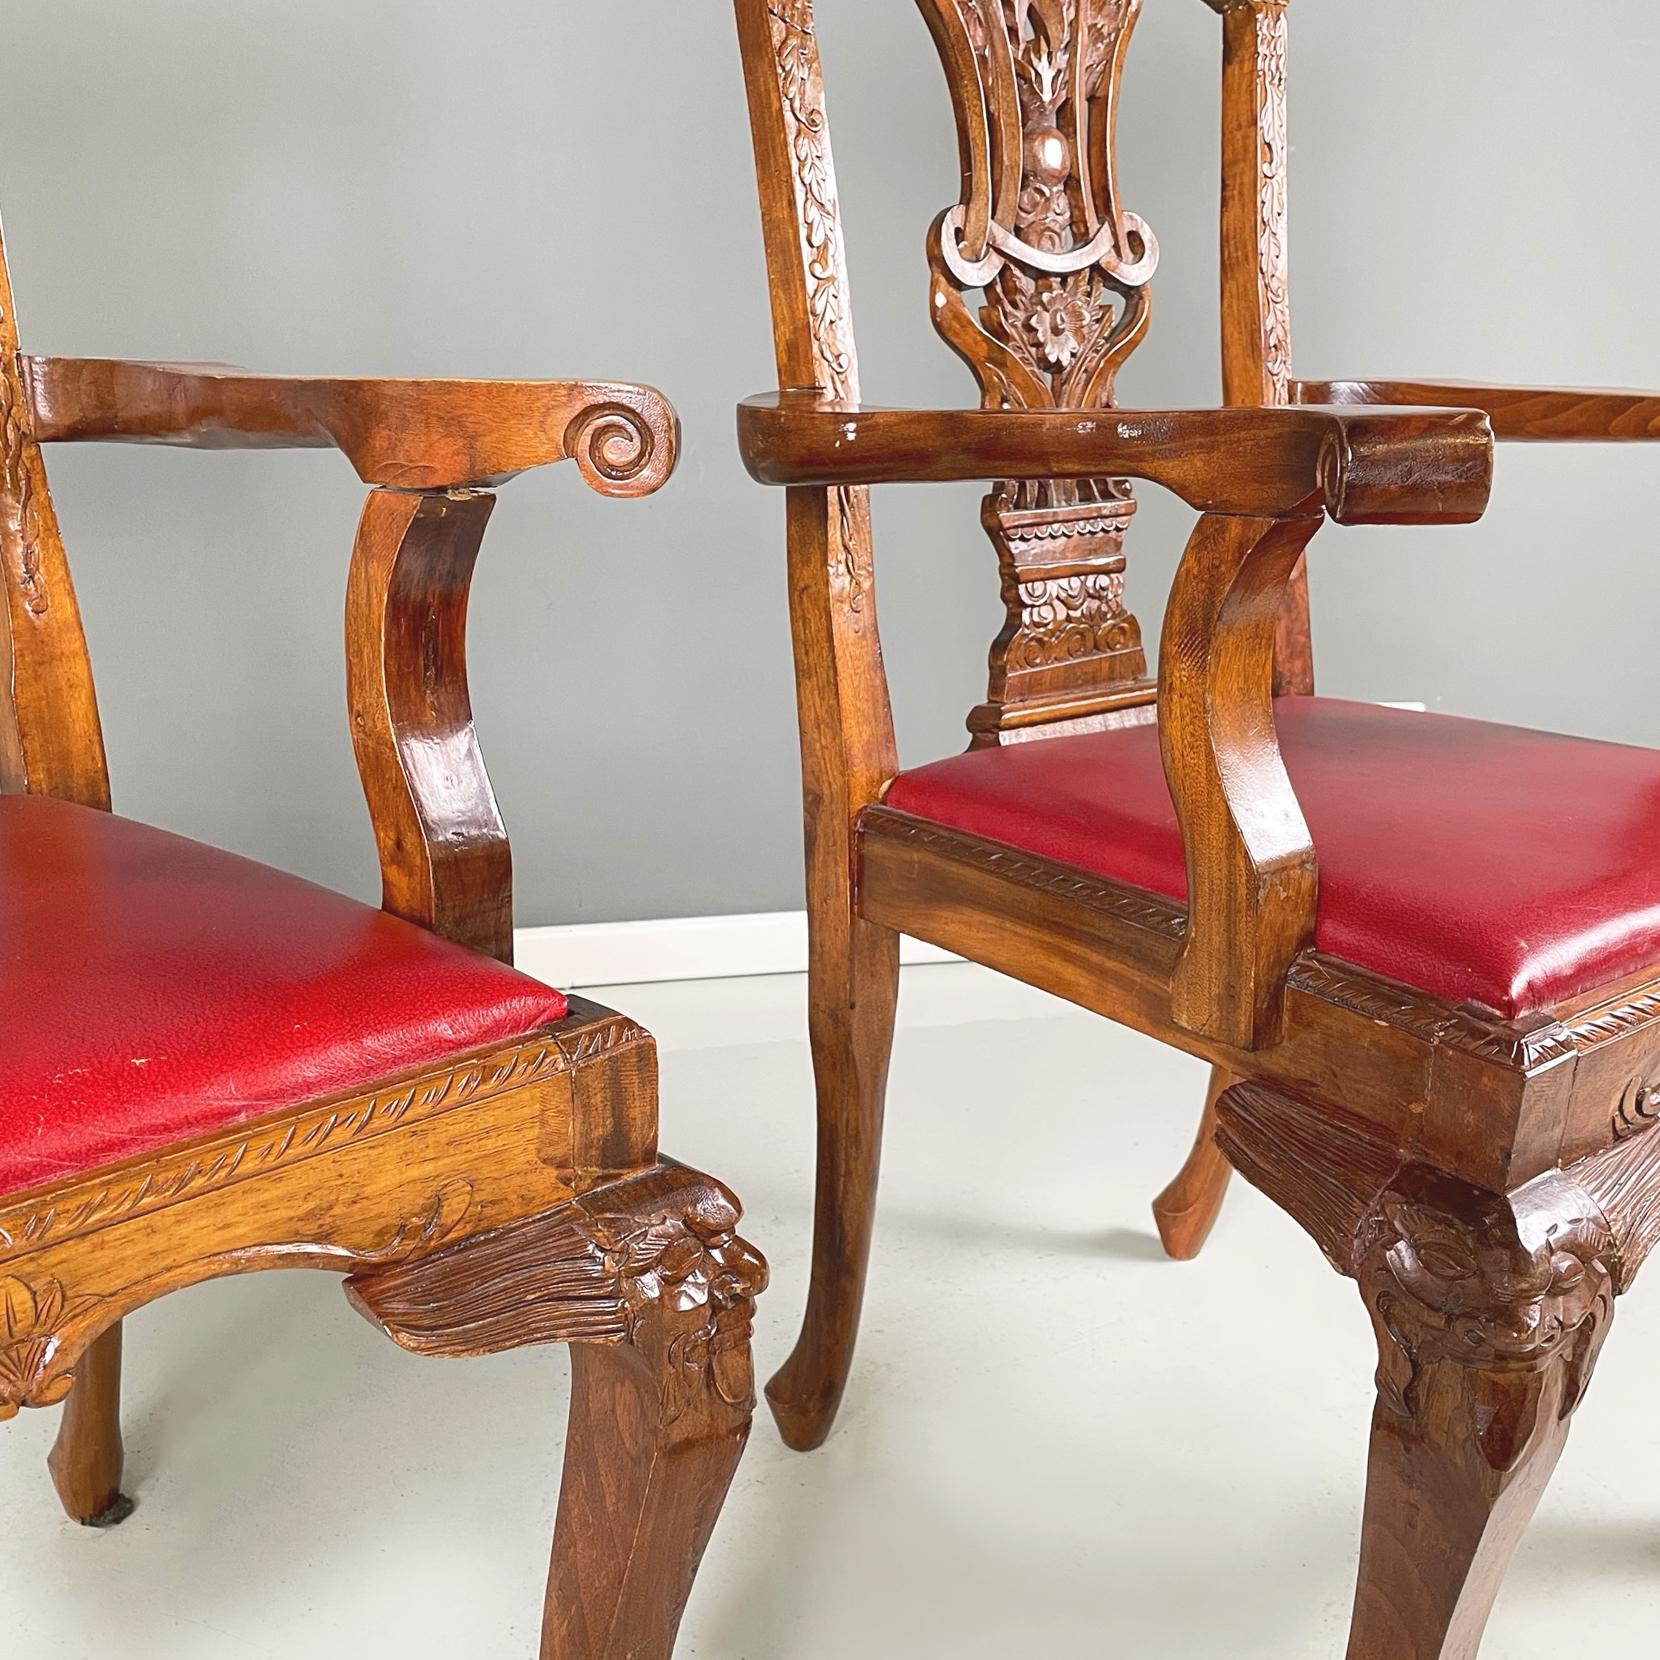 Chippendale Style Wooden Chairs with Red Leather, Early 1900s For Sale 3